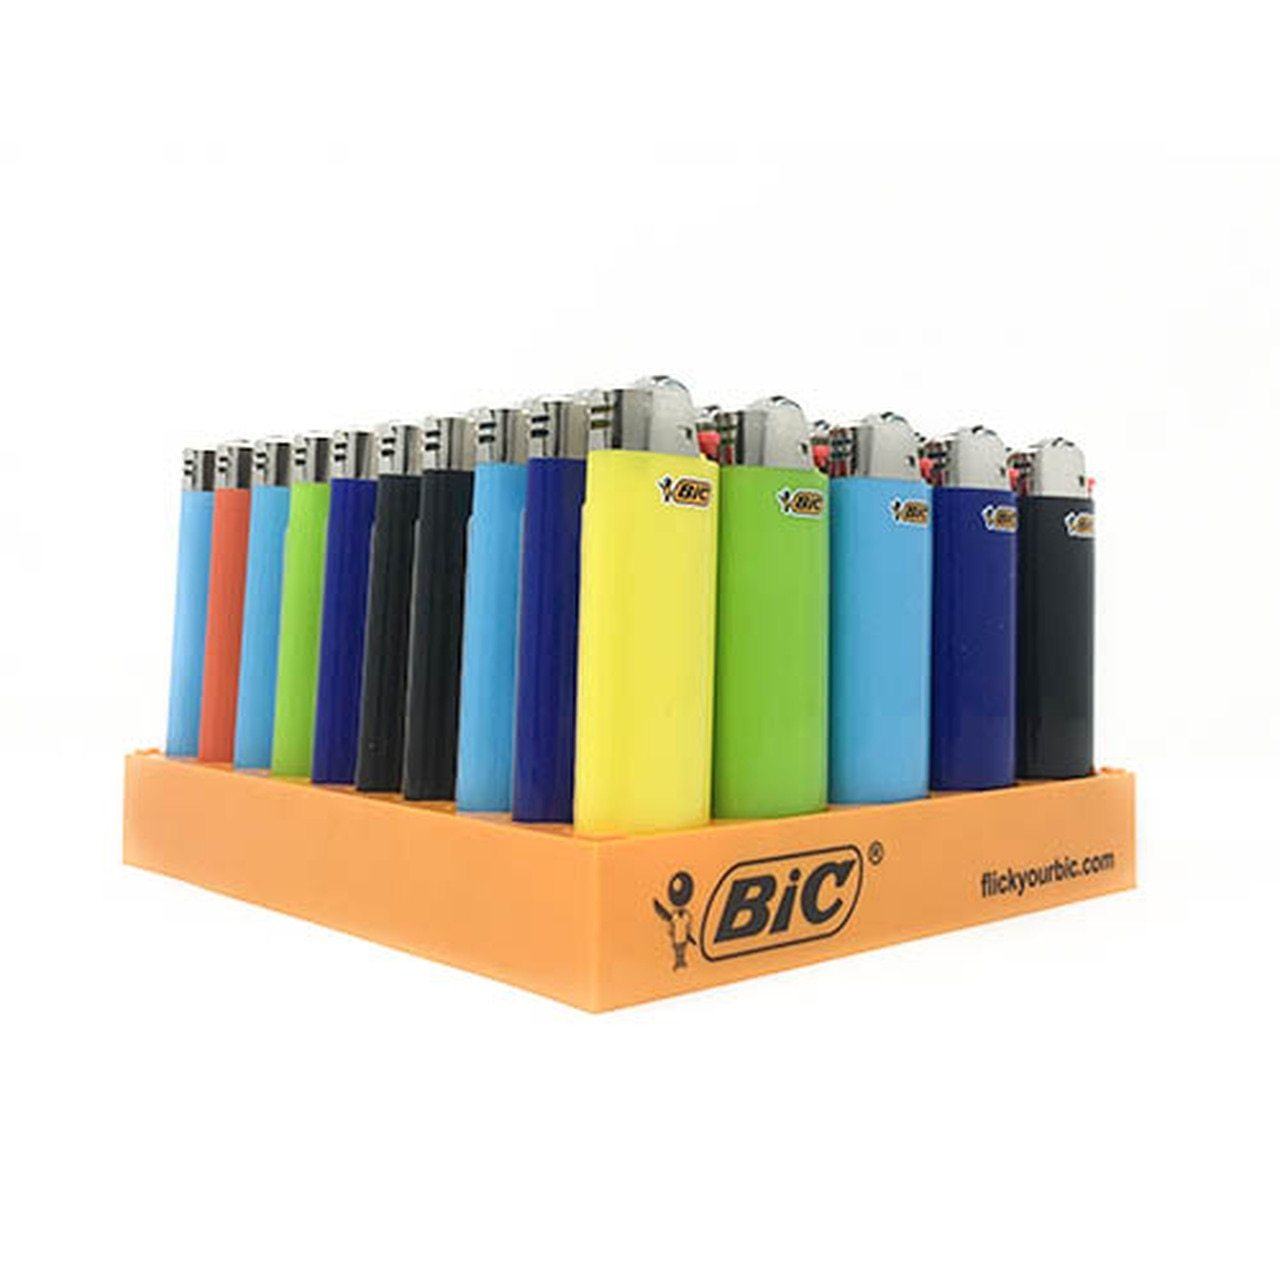 Bic Lighter Maxi Classic Assorted Colors (50 Count) Flower Power Packages 